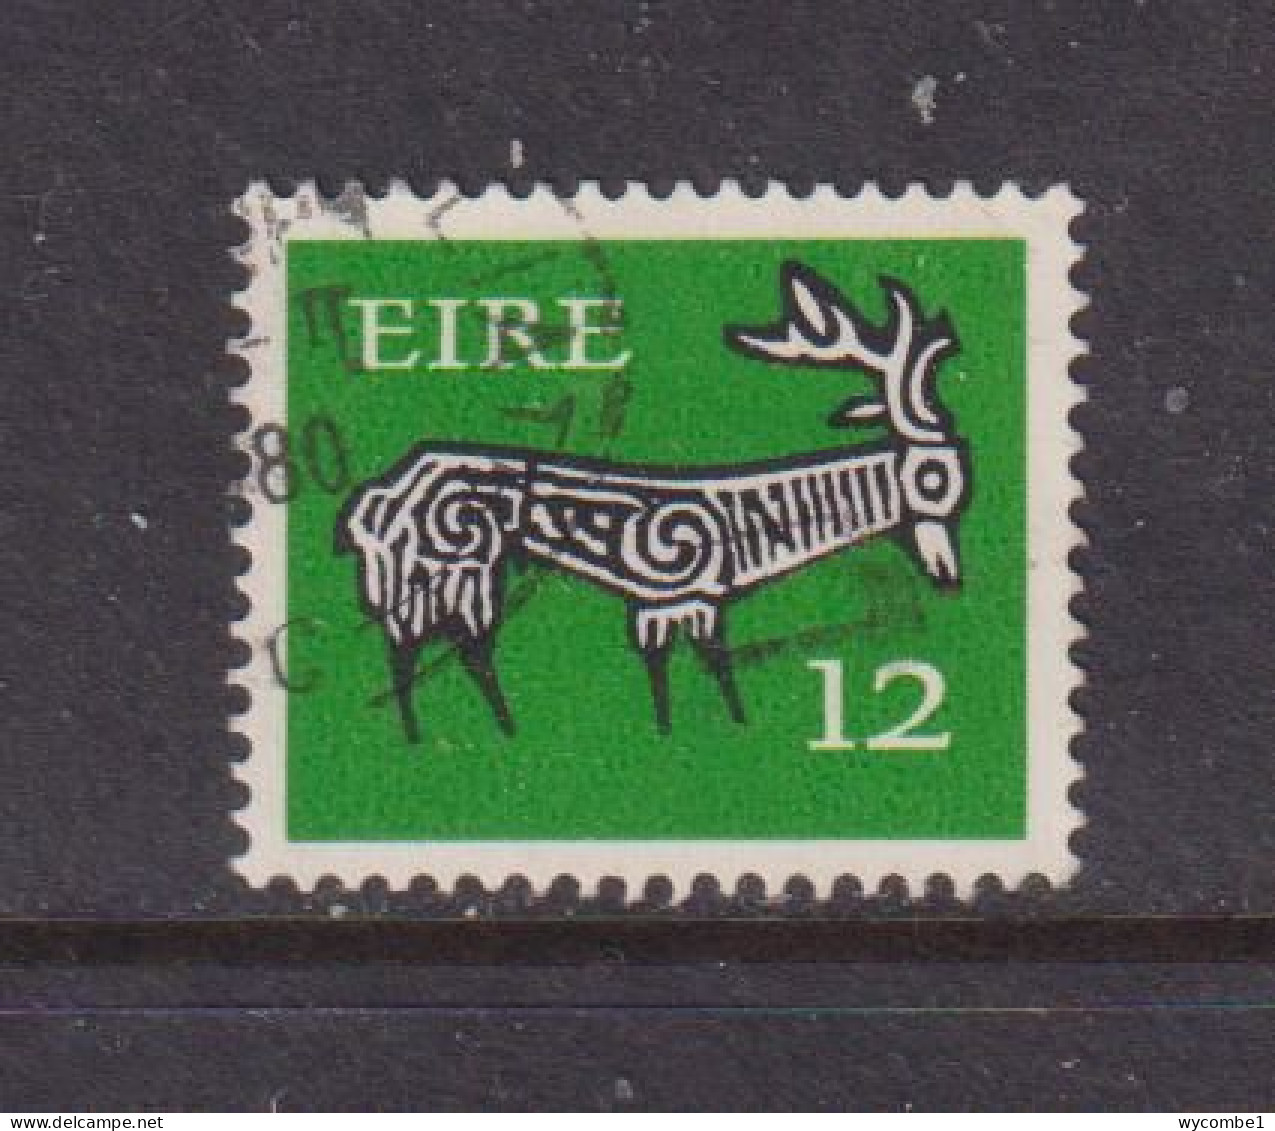 IRELAND - 1971  Decimal Currency Definitives  12p  Used As Scan - Usados